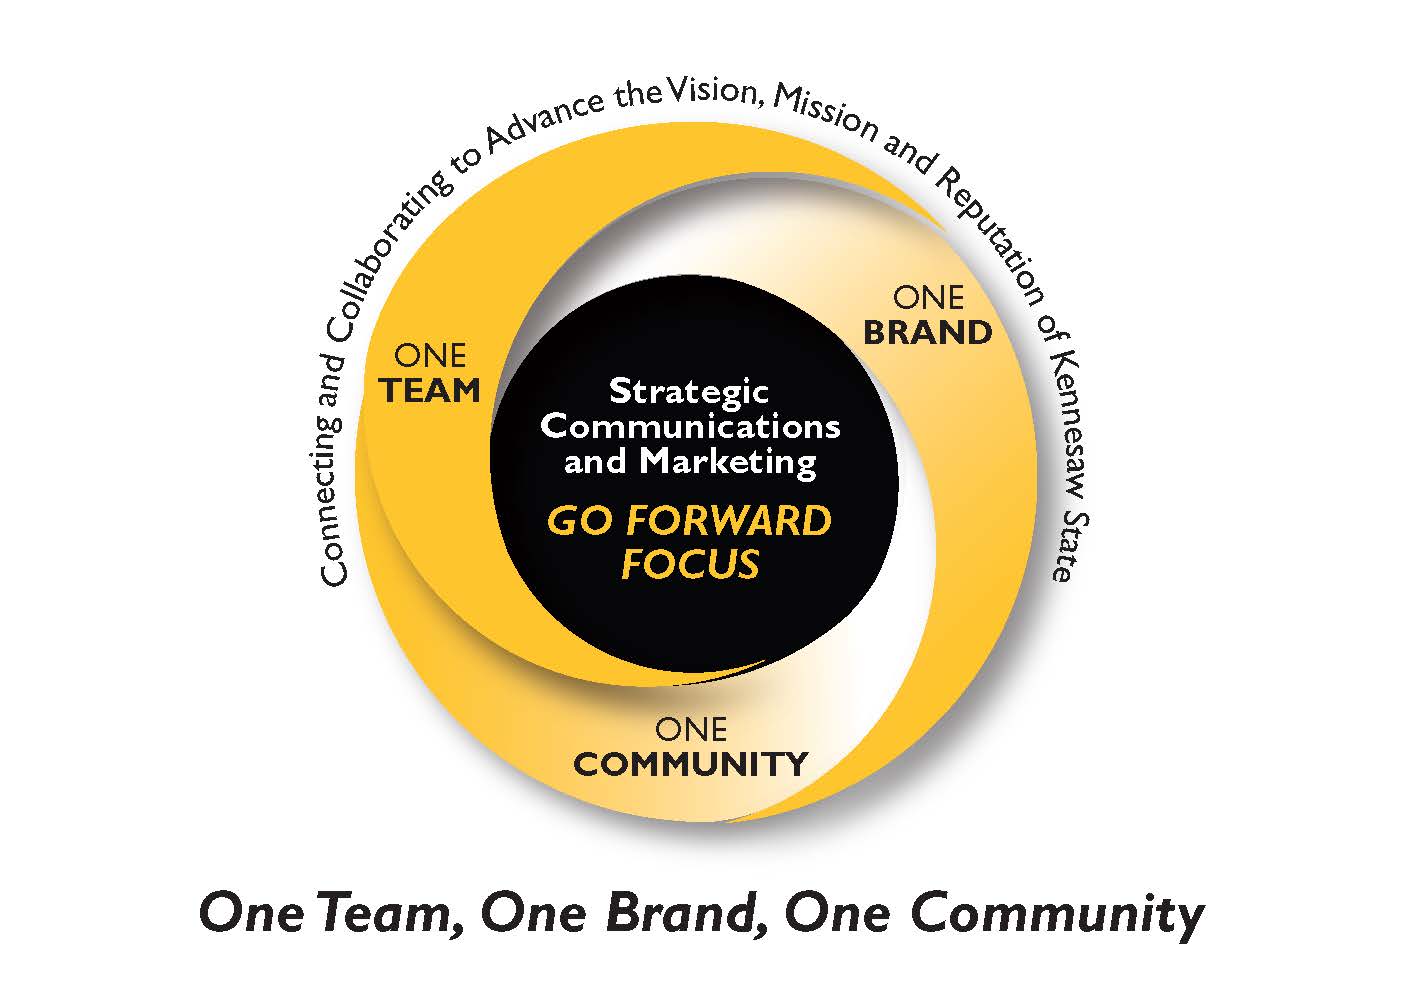 Go forward focus is about connecting and collaborating to advance the vision, mission and reputation of Kennesaw state as one team, one brand and one community